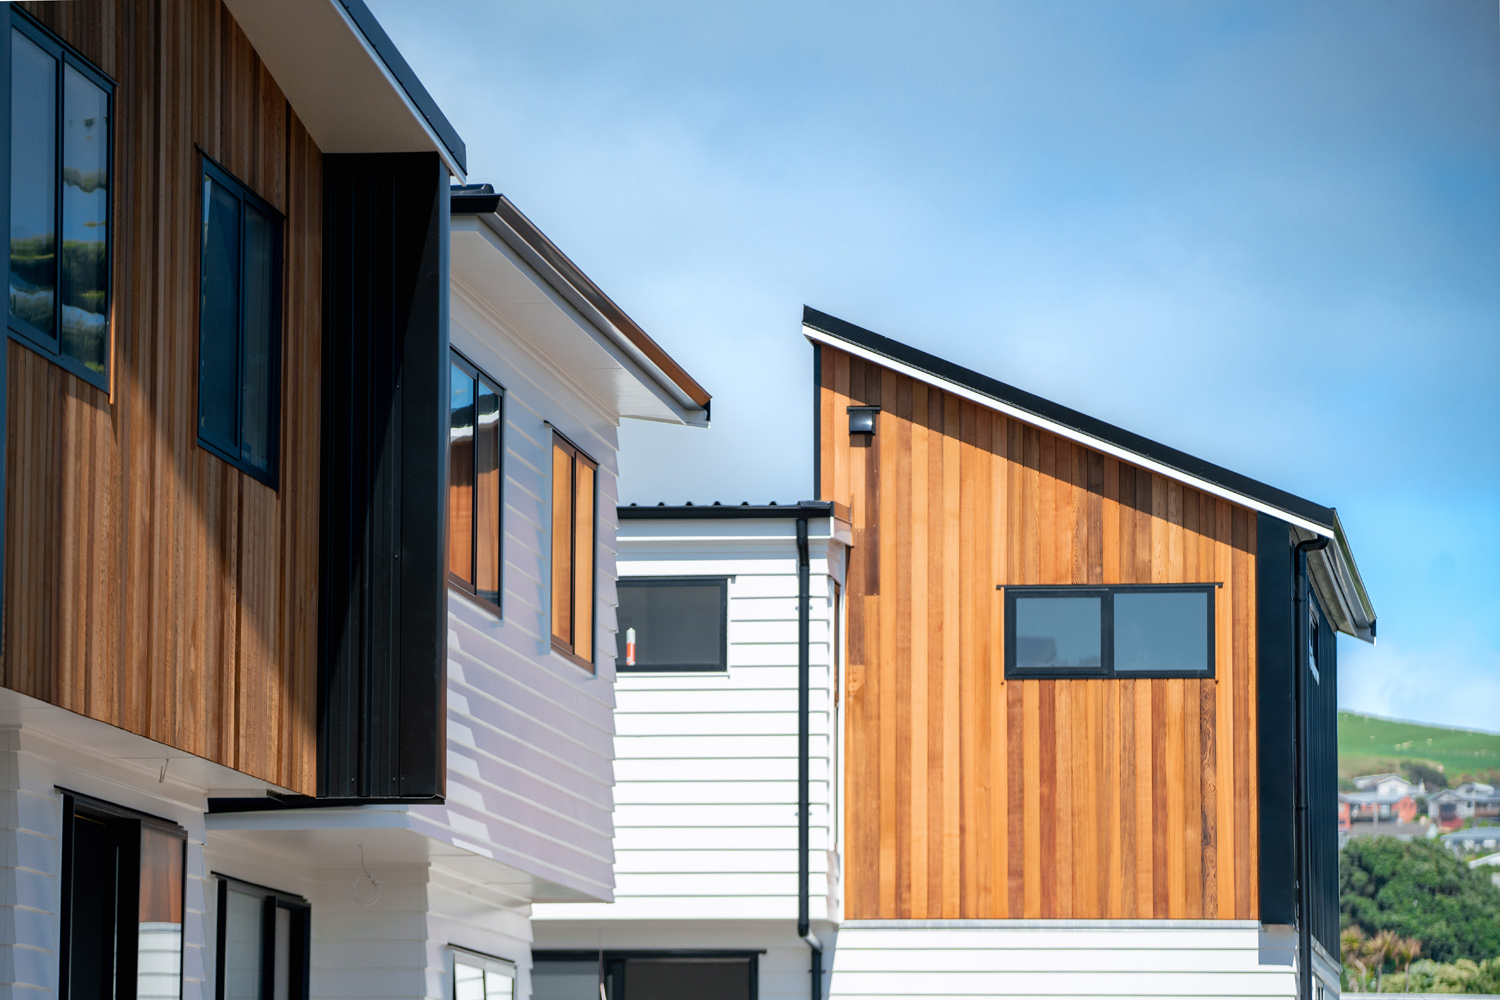 Cladding multiple houses